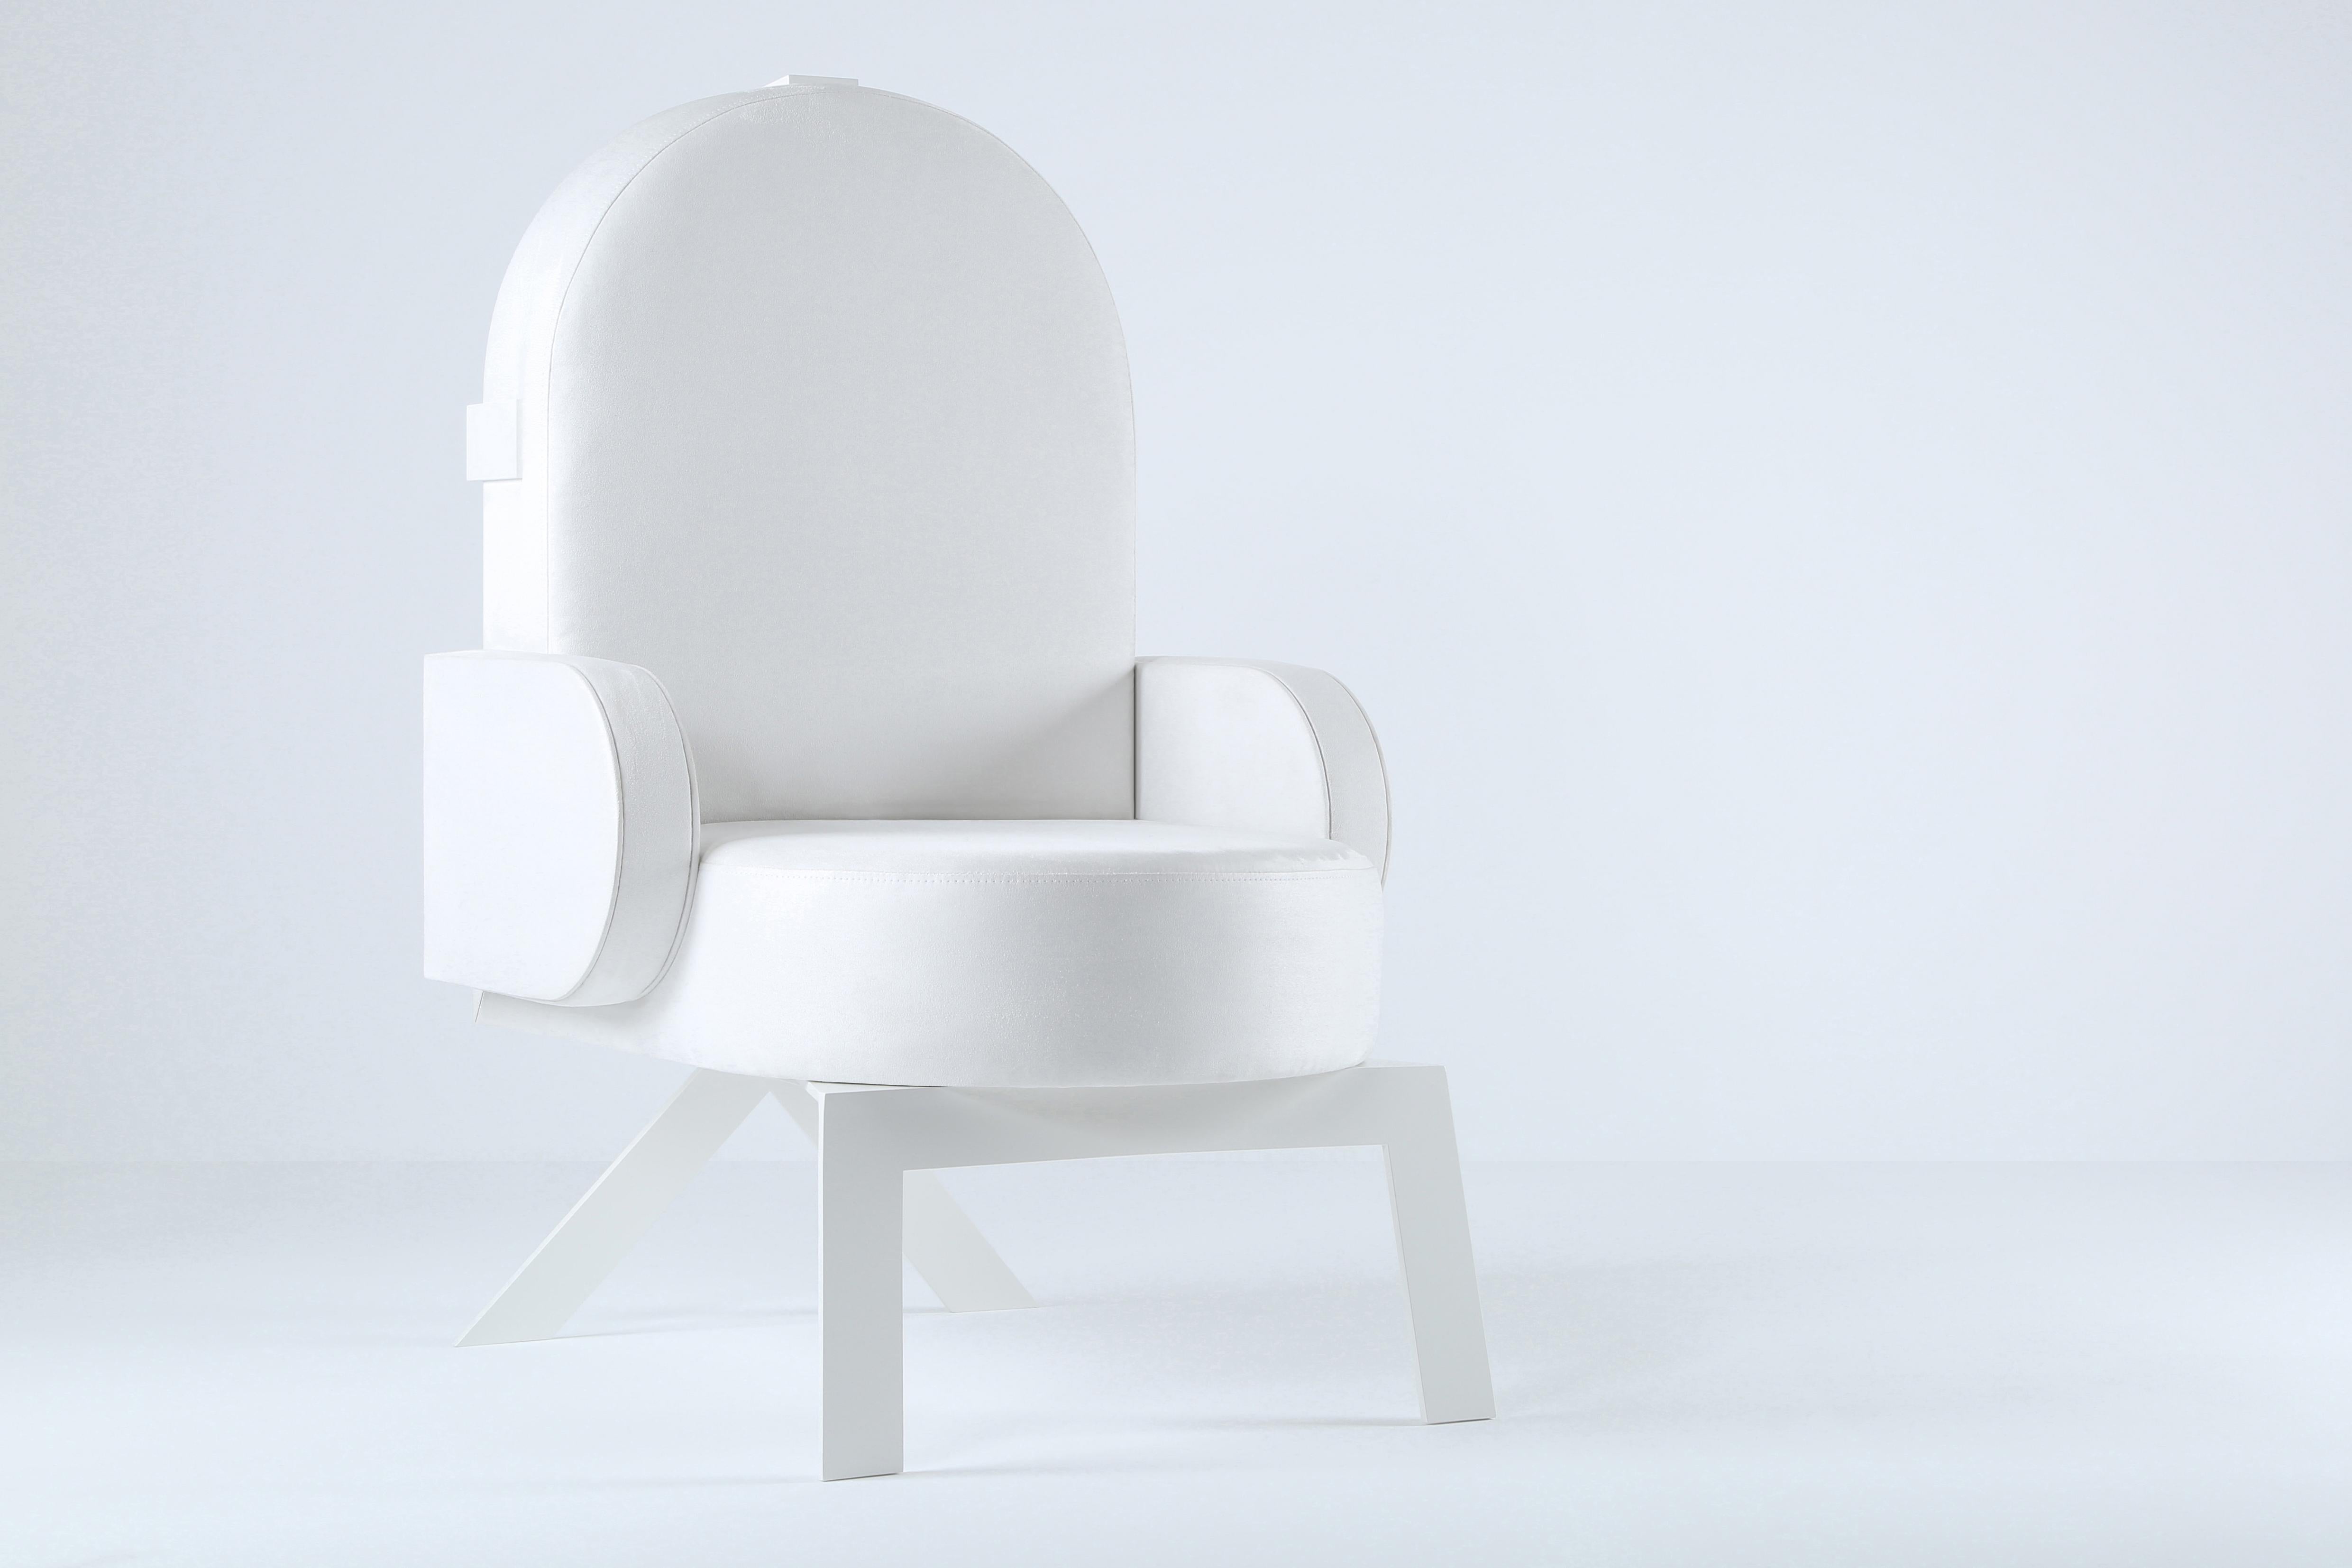 The Cure armchair by Richard Yasmine
Materials: structure in powder coated Aluminum, Fabric Upholstery
Dimensions: H.100 x W.62.5 x D.71.5 cm

The word “cure” means restore, so far a concern to solve an existent dilemma, in our case a potential